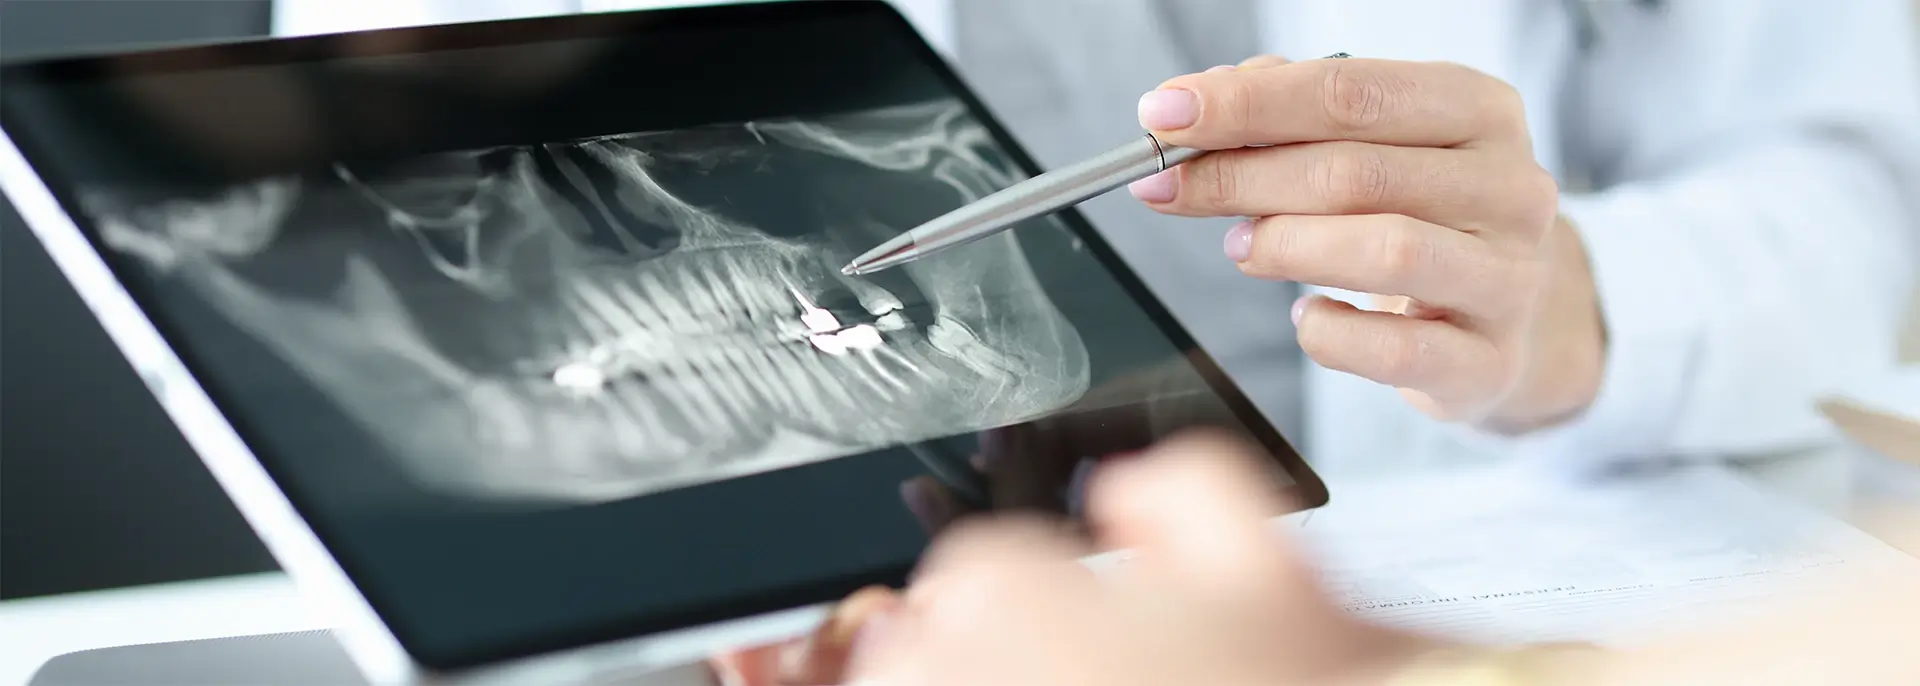 Dentist holding a stylus and pointing to dental X-rays on a tablet